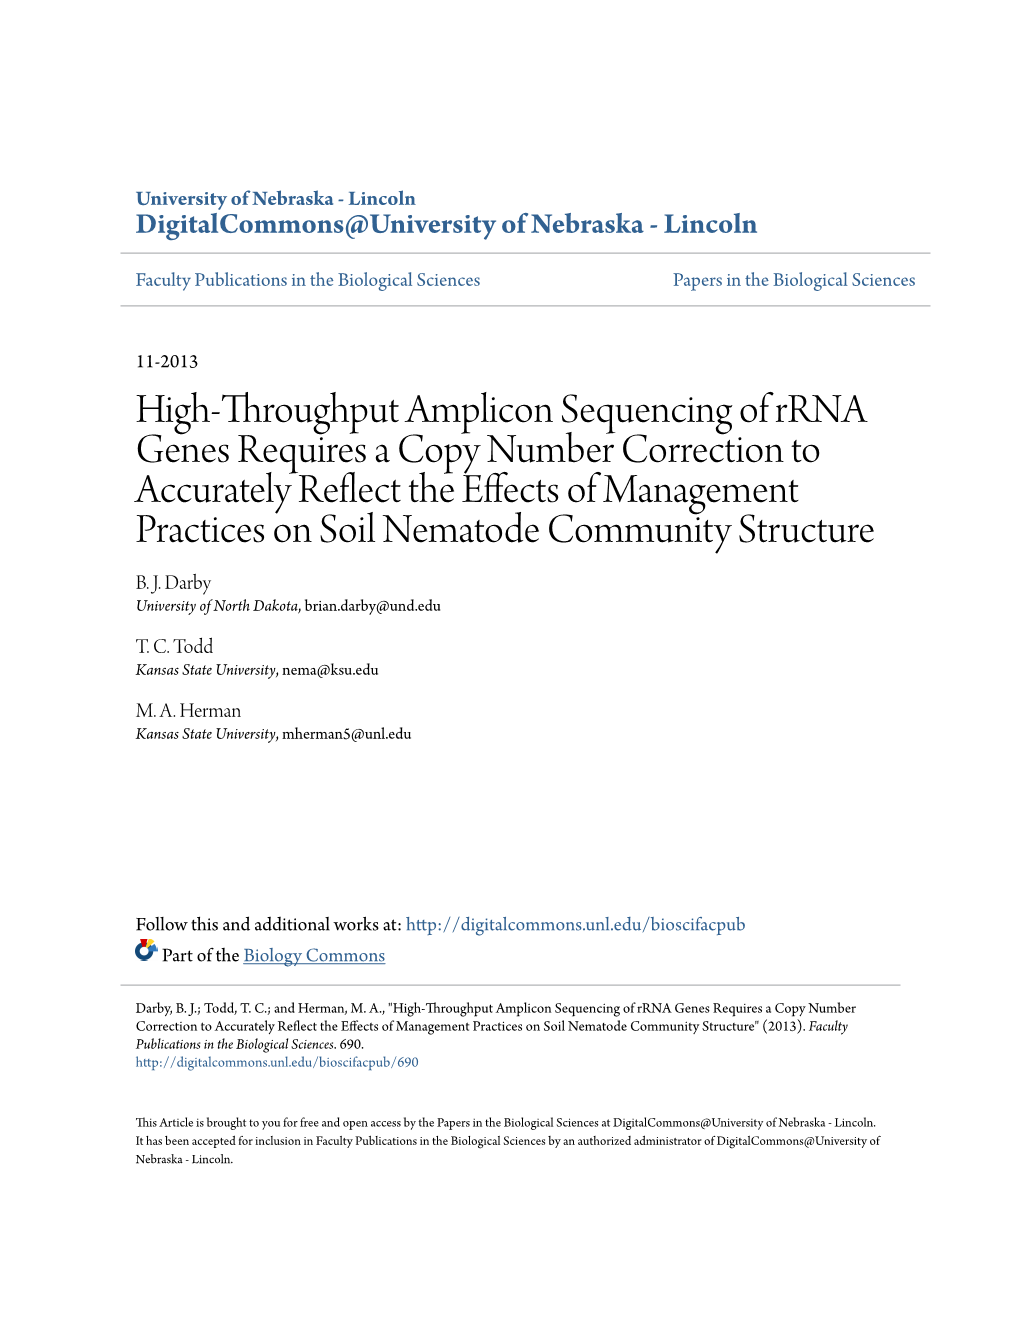 High-Throughput Amplicon Sequencing of Rrna Genes